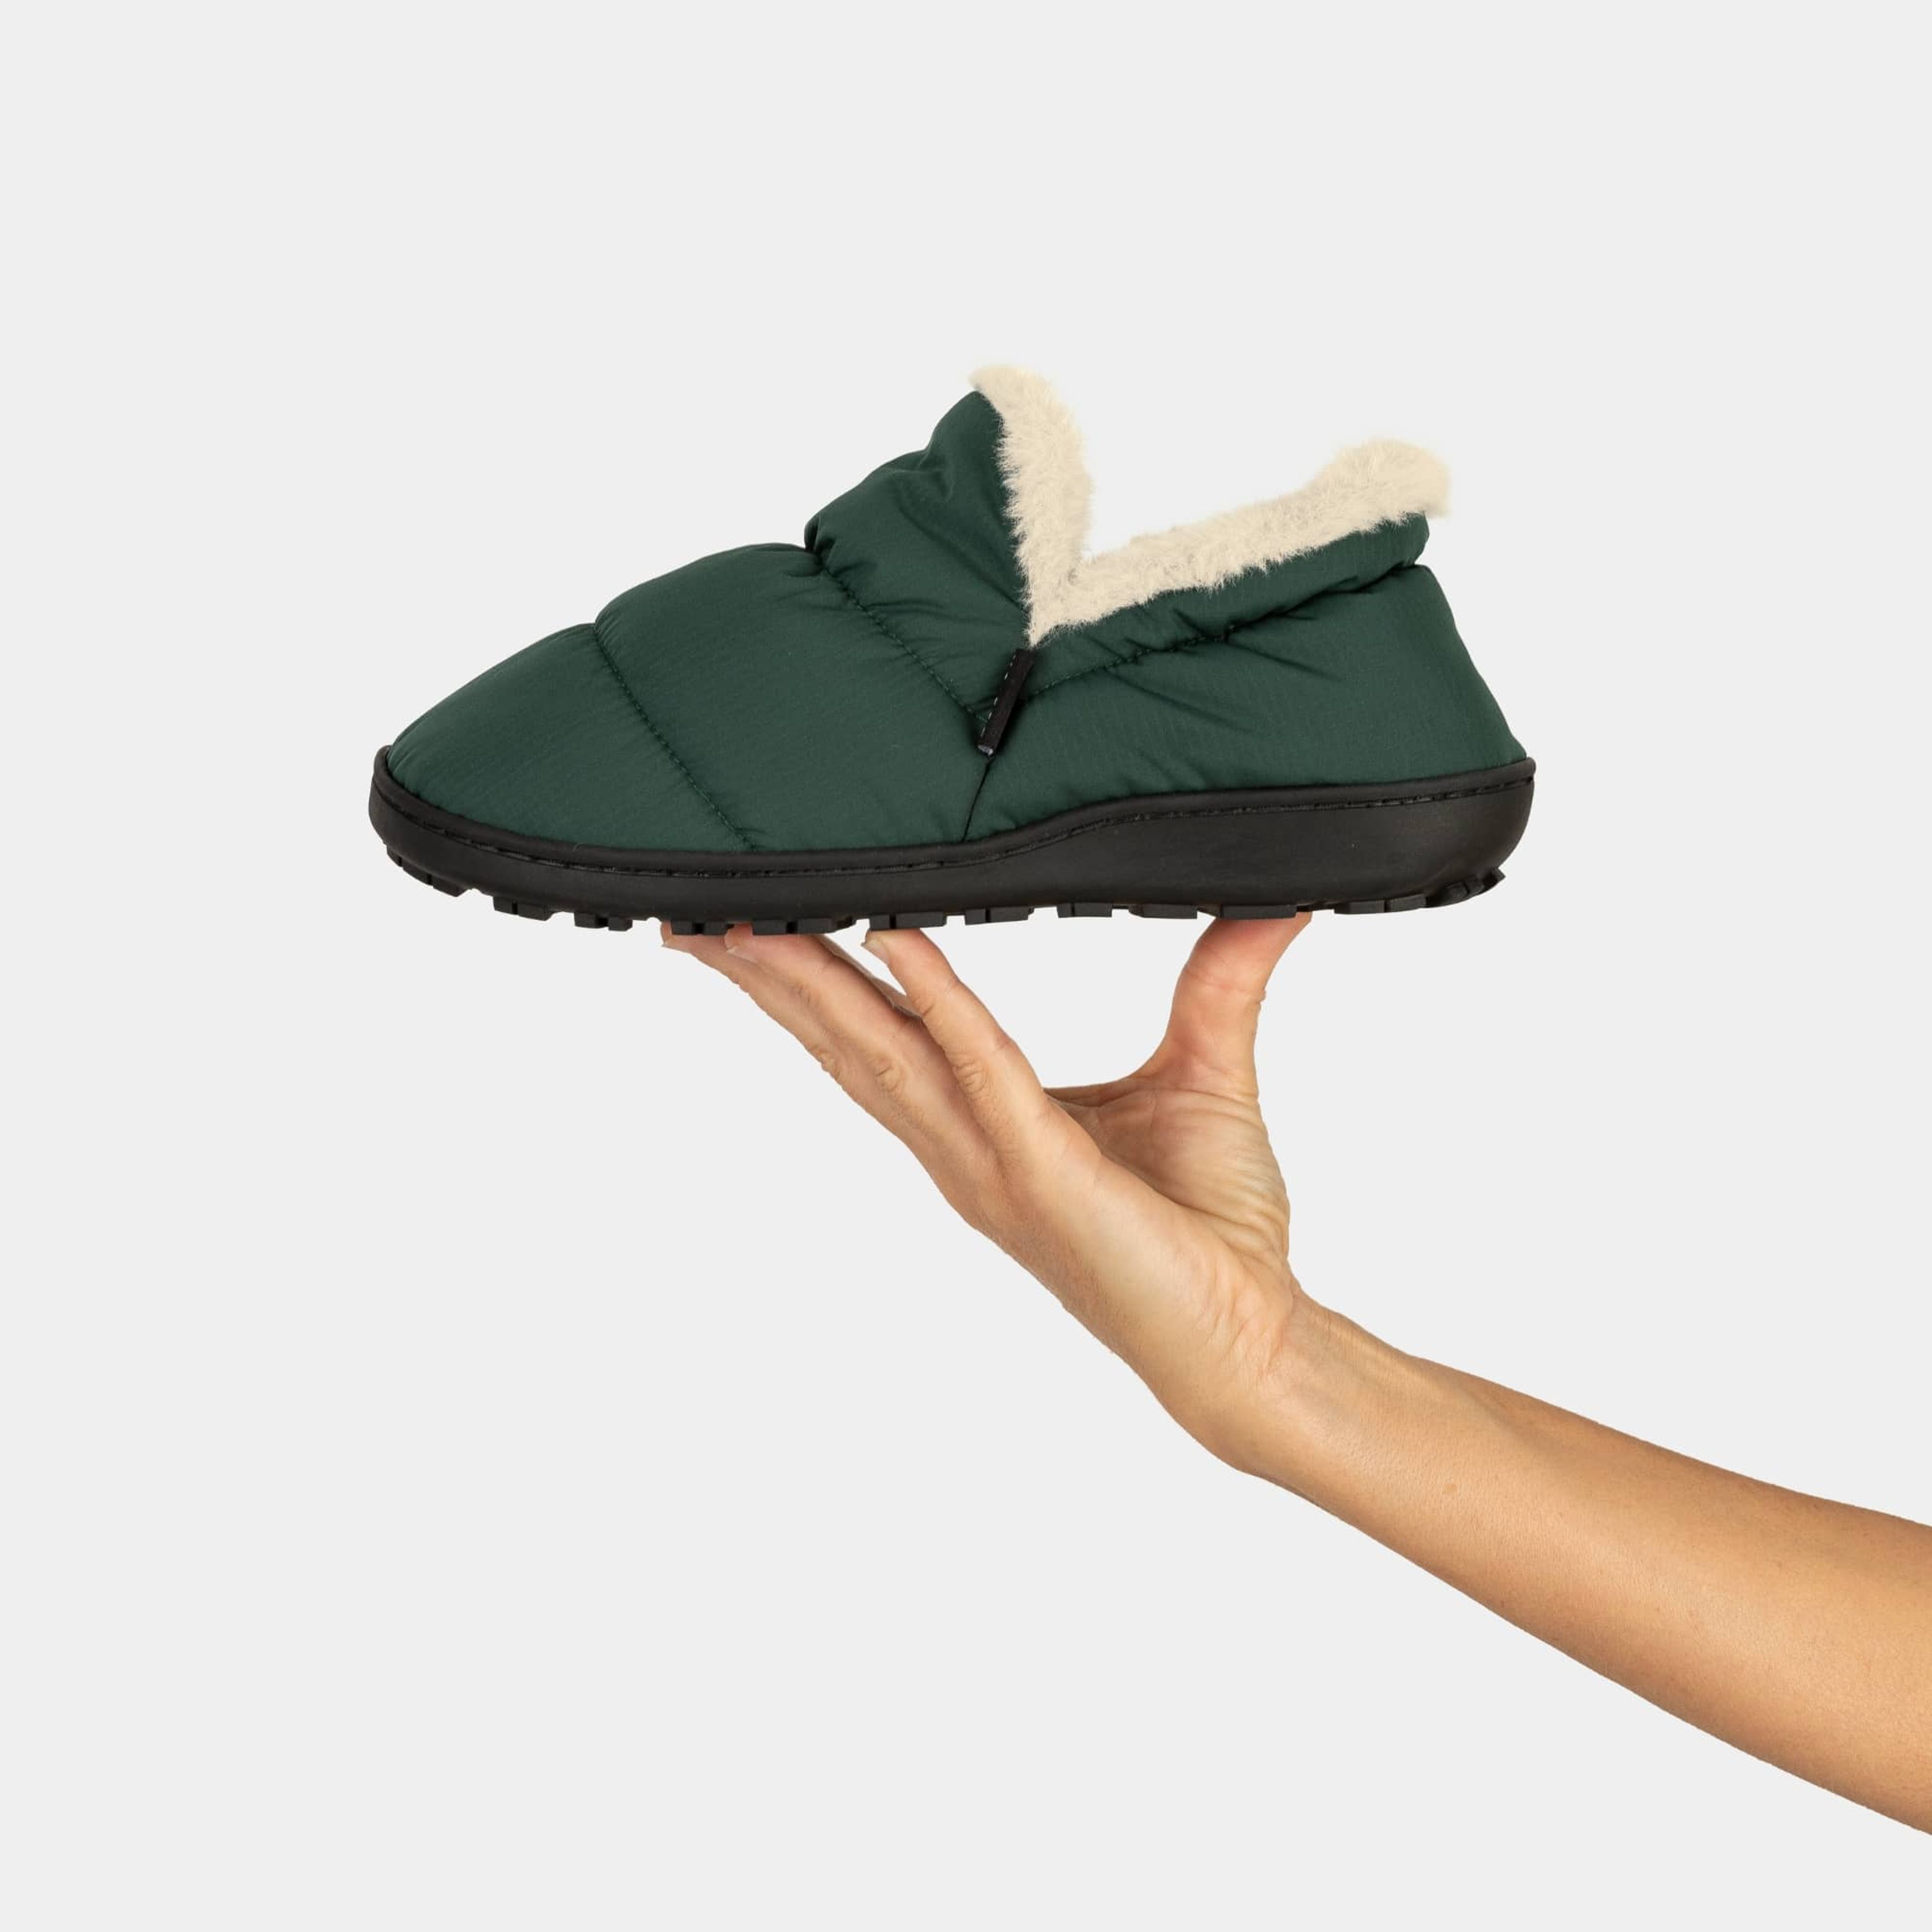 VOITED CloudTouch Slippers - Lightweight, Indoor/Outdoor Fleece-Lined Camping Slippers - Green Gables